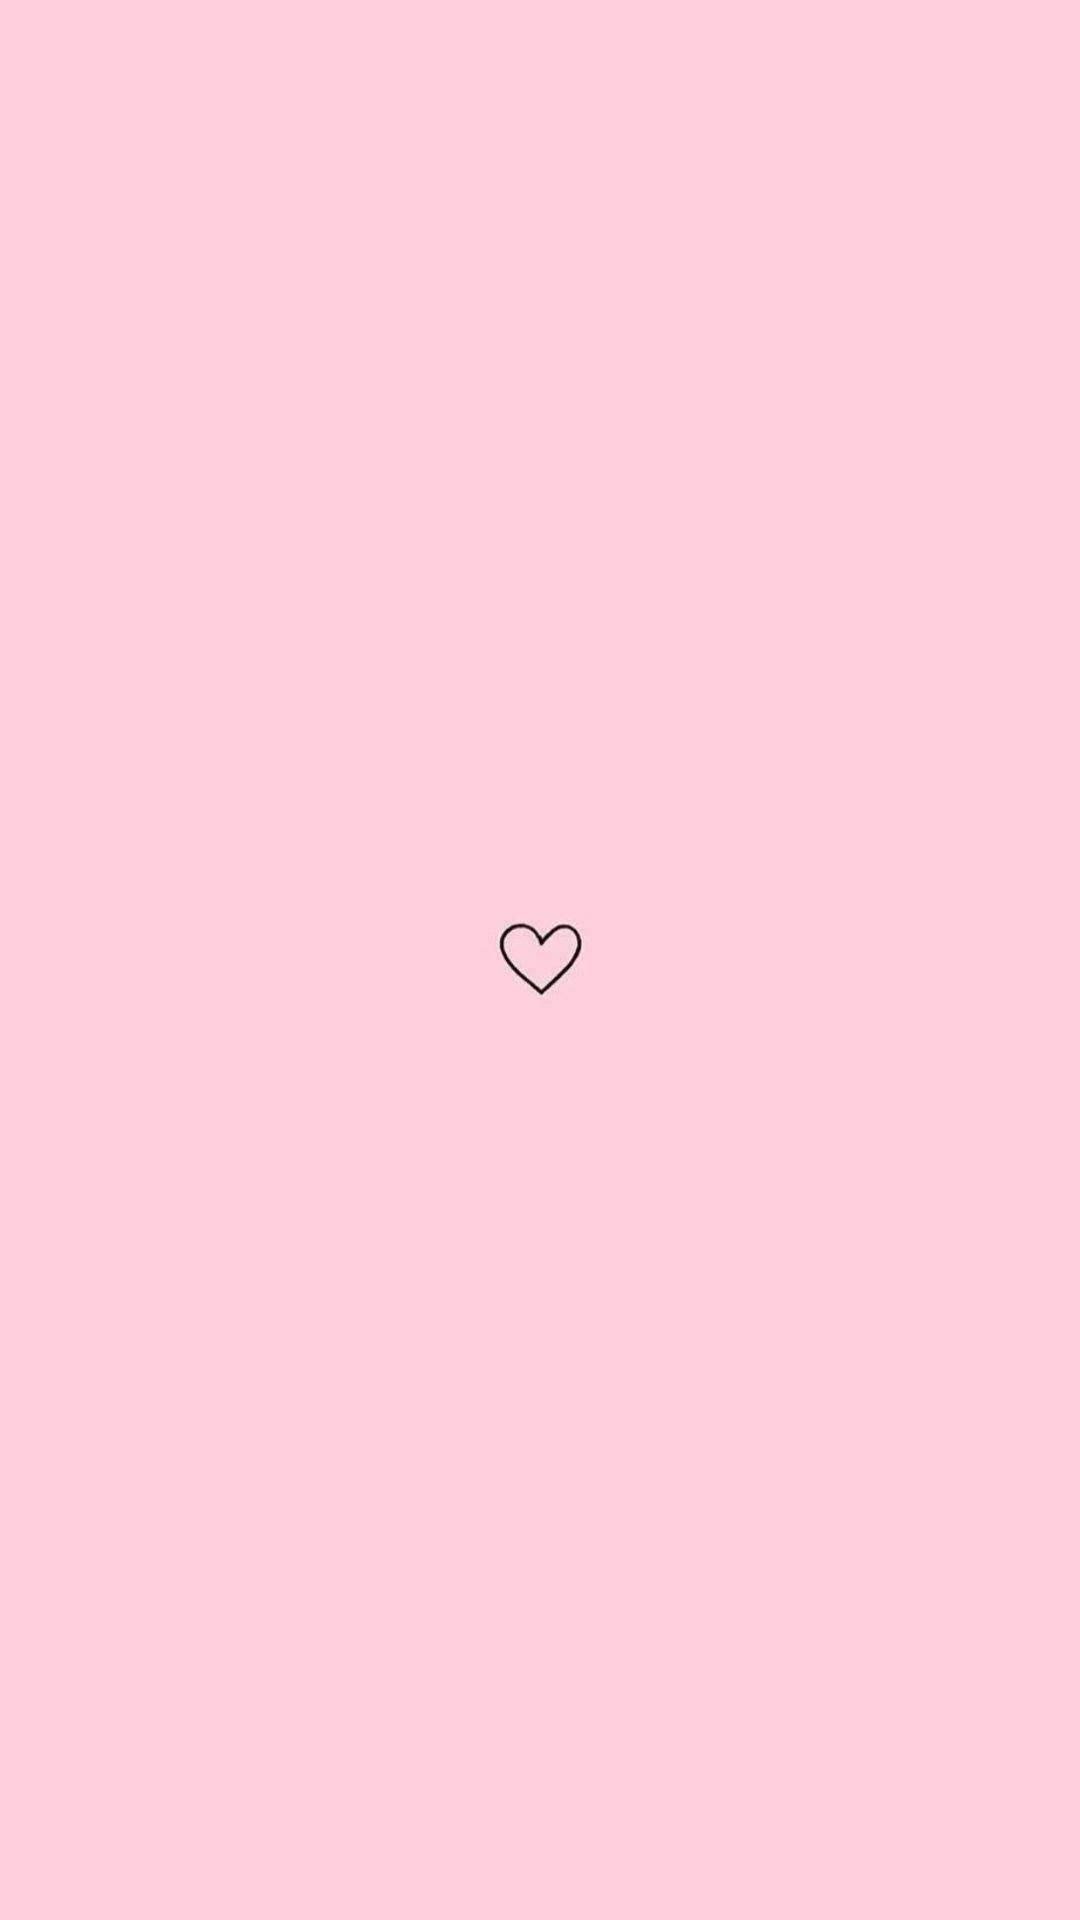 A heart on pink background - Heart, profile picture